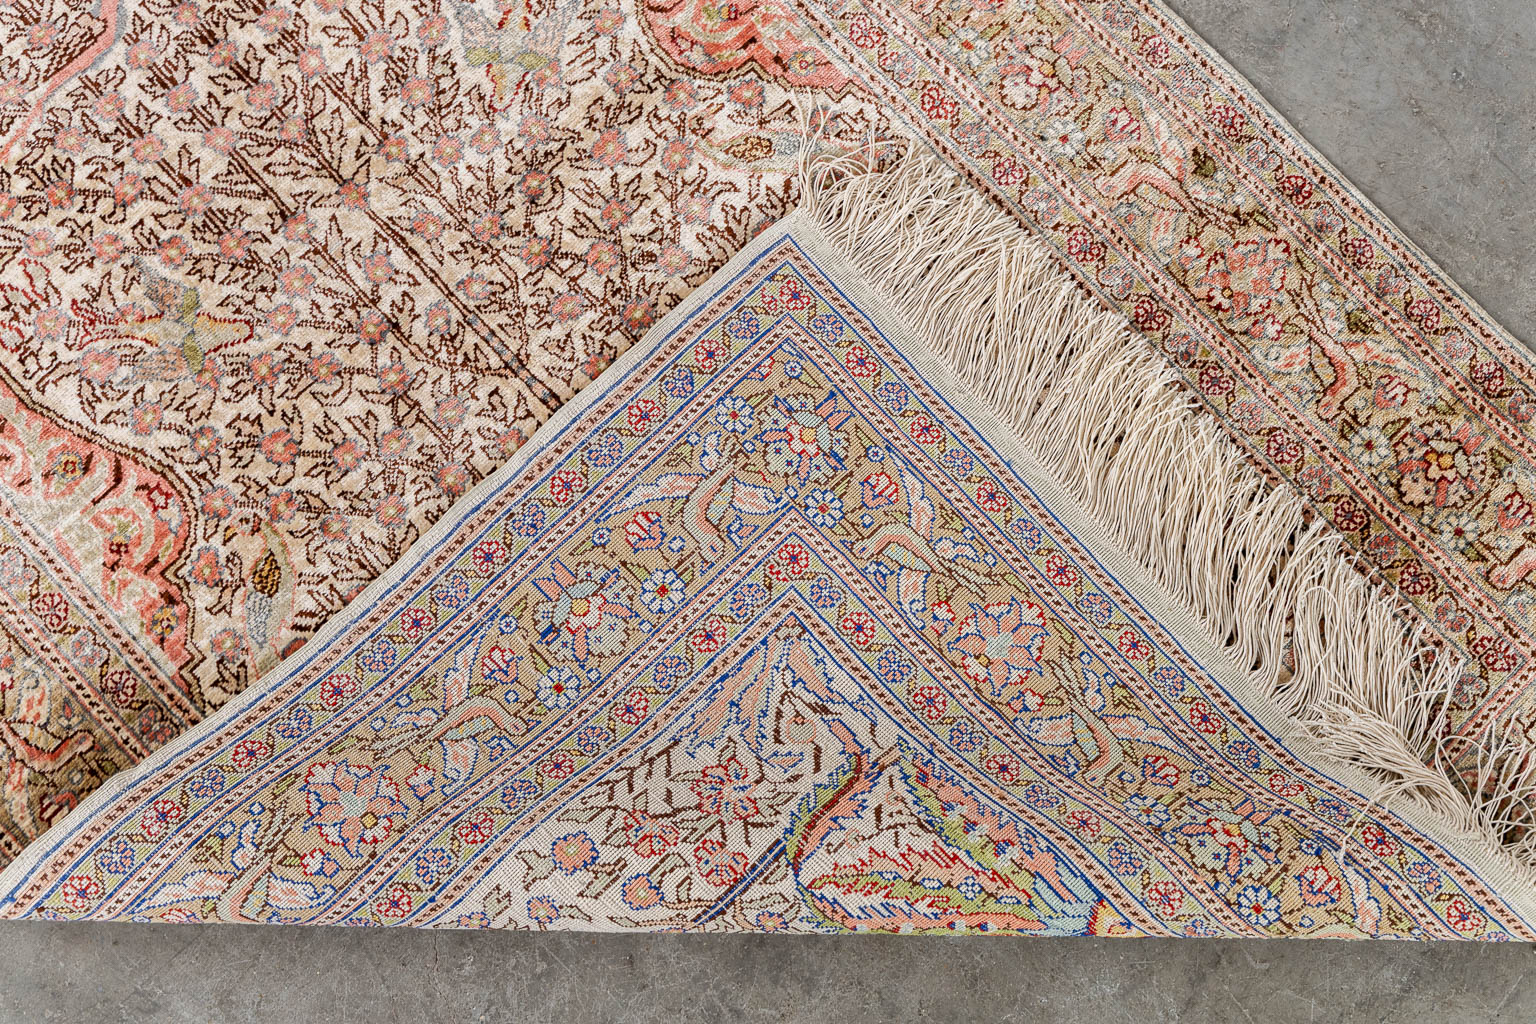 An Oriental hand-made carpet with 